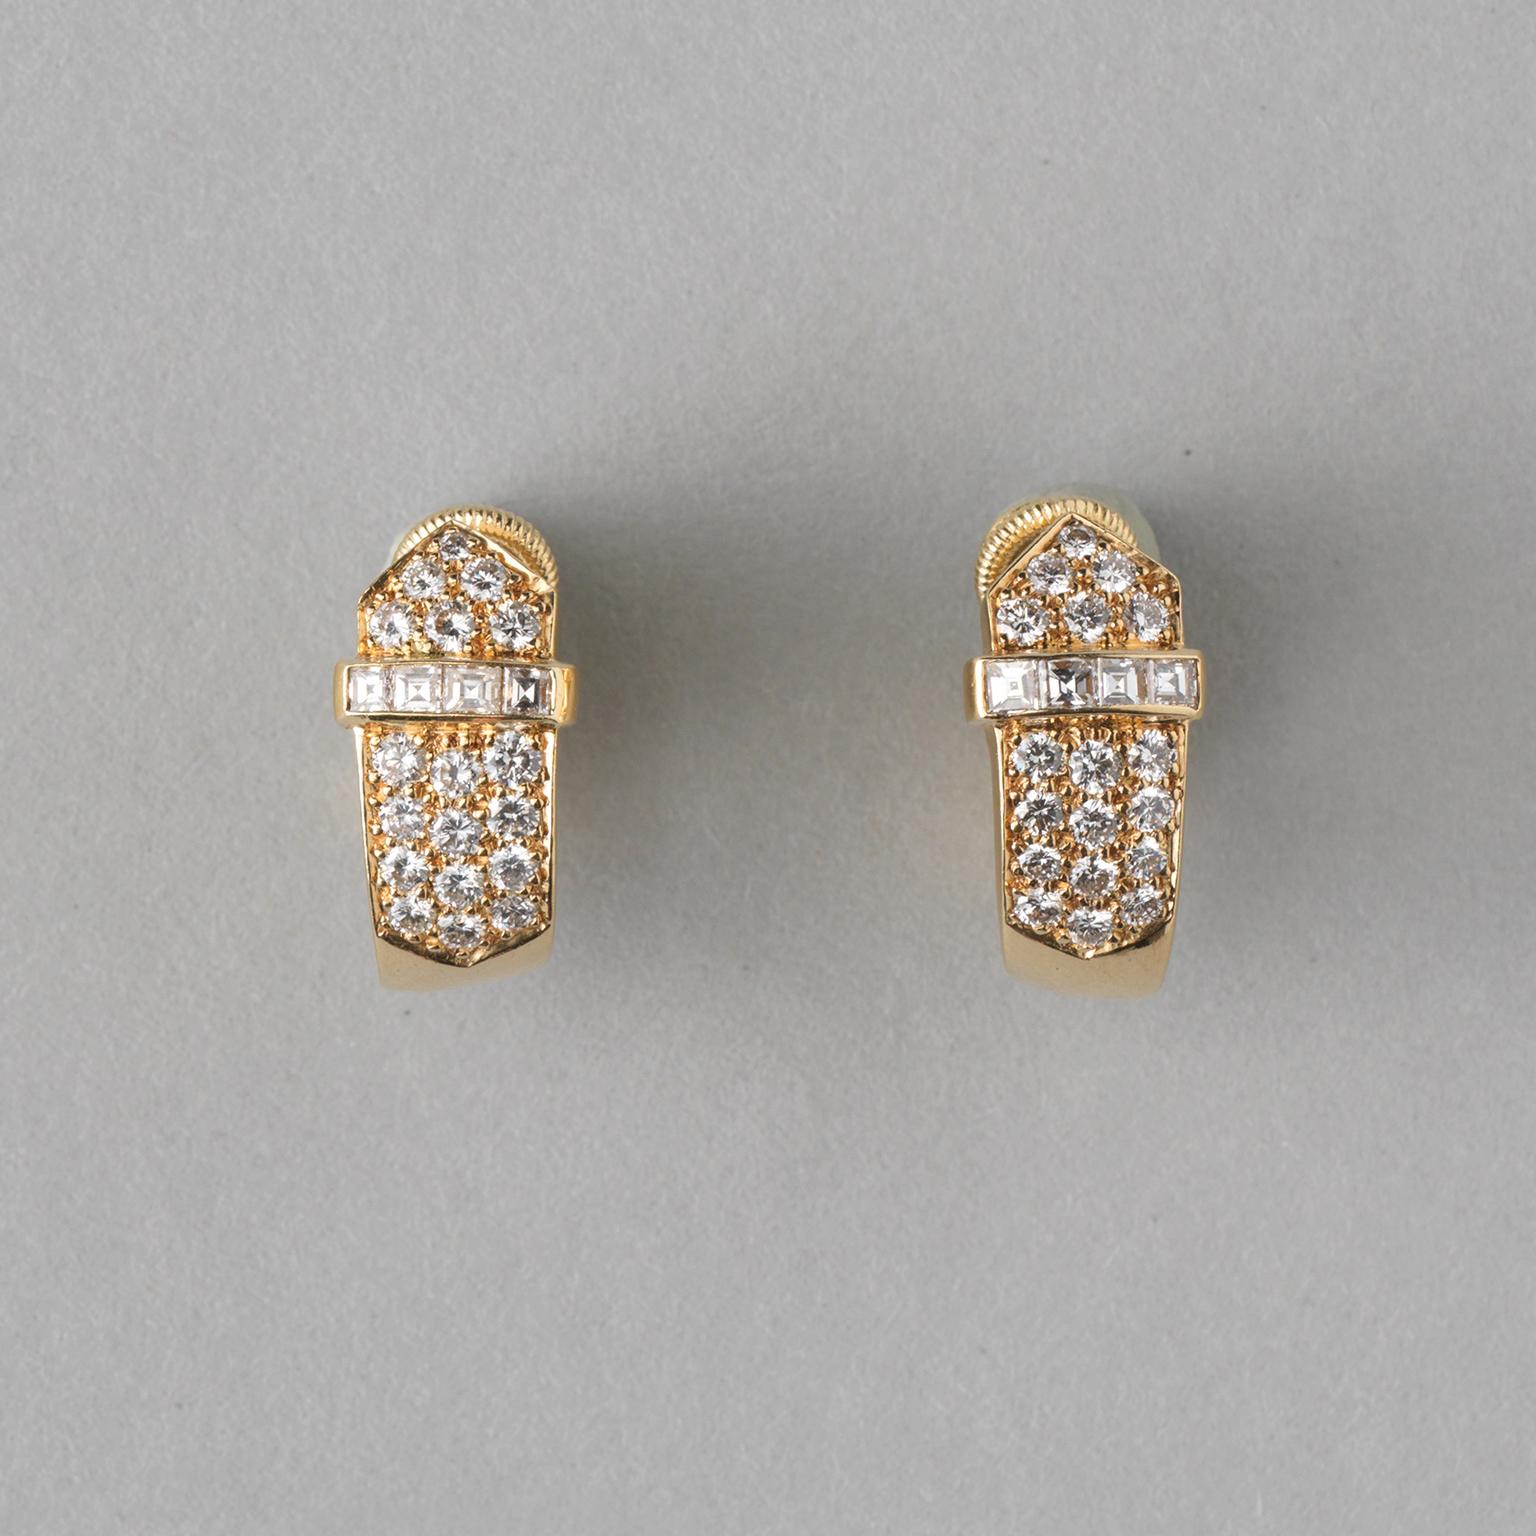 A pair of 18 carat yellow gold buckle ear clips set with brilliant cut diamonds and a little band with four carré cut diamonds  (app. 1.36 carat in total) master mark: DM for David Morris, England, 1990.

weight: 8.75 gram
dimensions: 1.8 x 0.9 cm